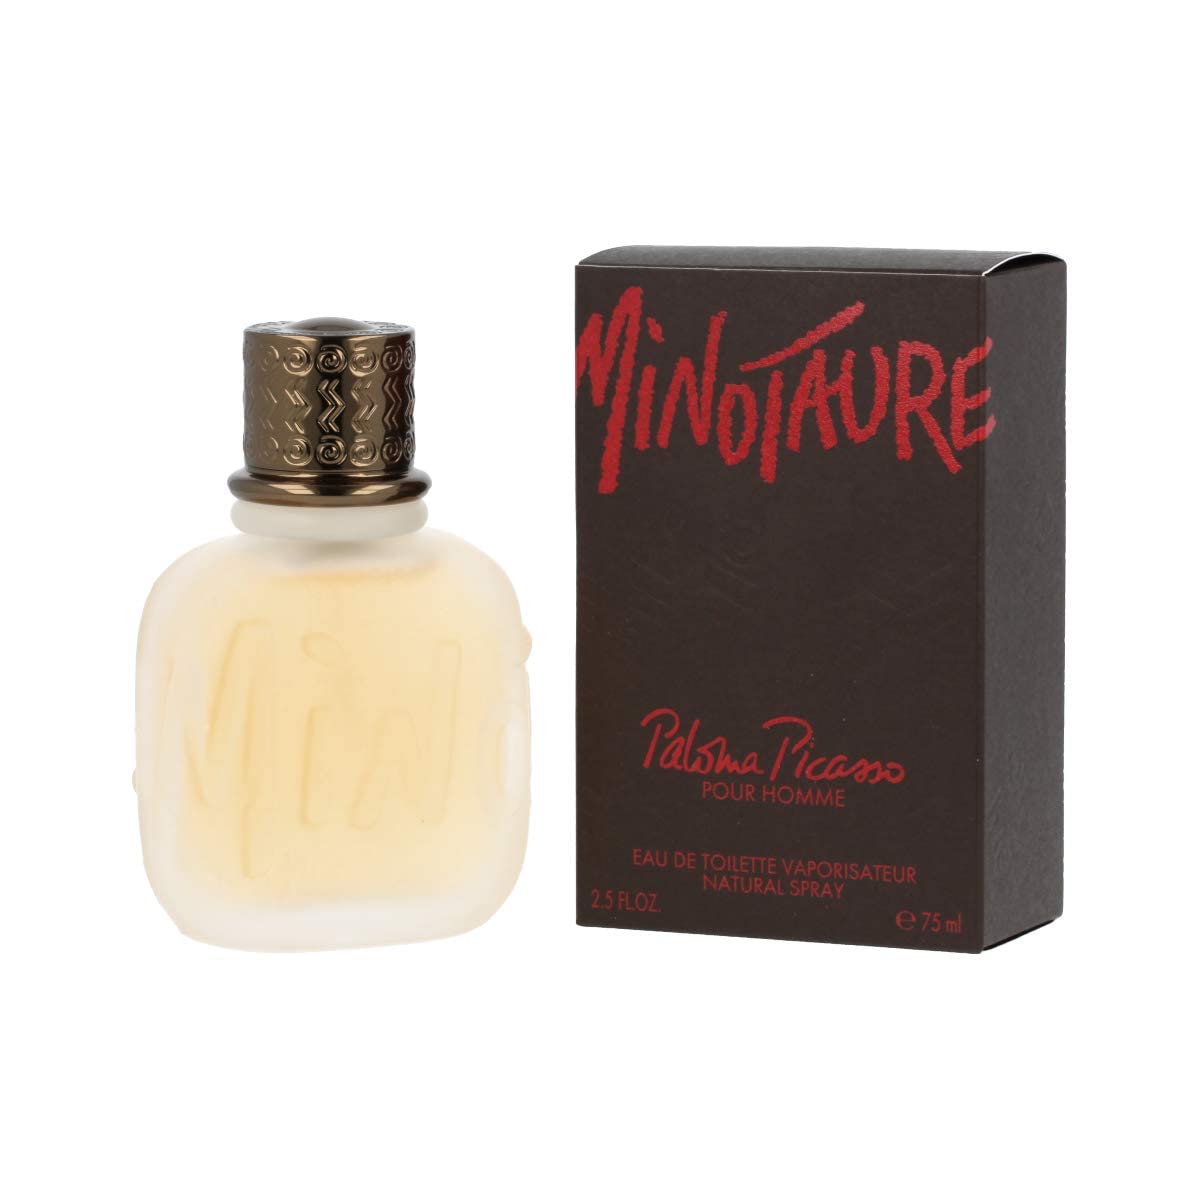 Minotaure By Paloma Picasso For Men - Designer Eau De Toilette - Men'S Amber Cologne - Lightweight Scent Infused With Fruity, Musky Notes - Stylish, Portable Bottle Design - 2.5 Oz Edt Spray